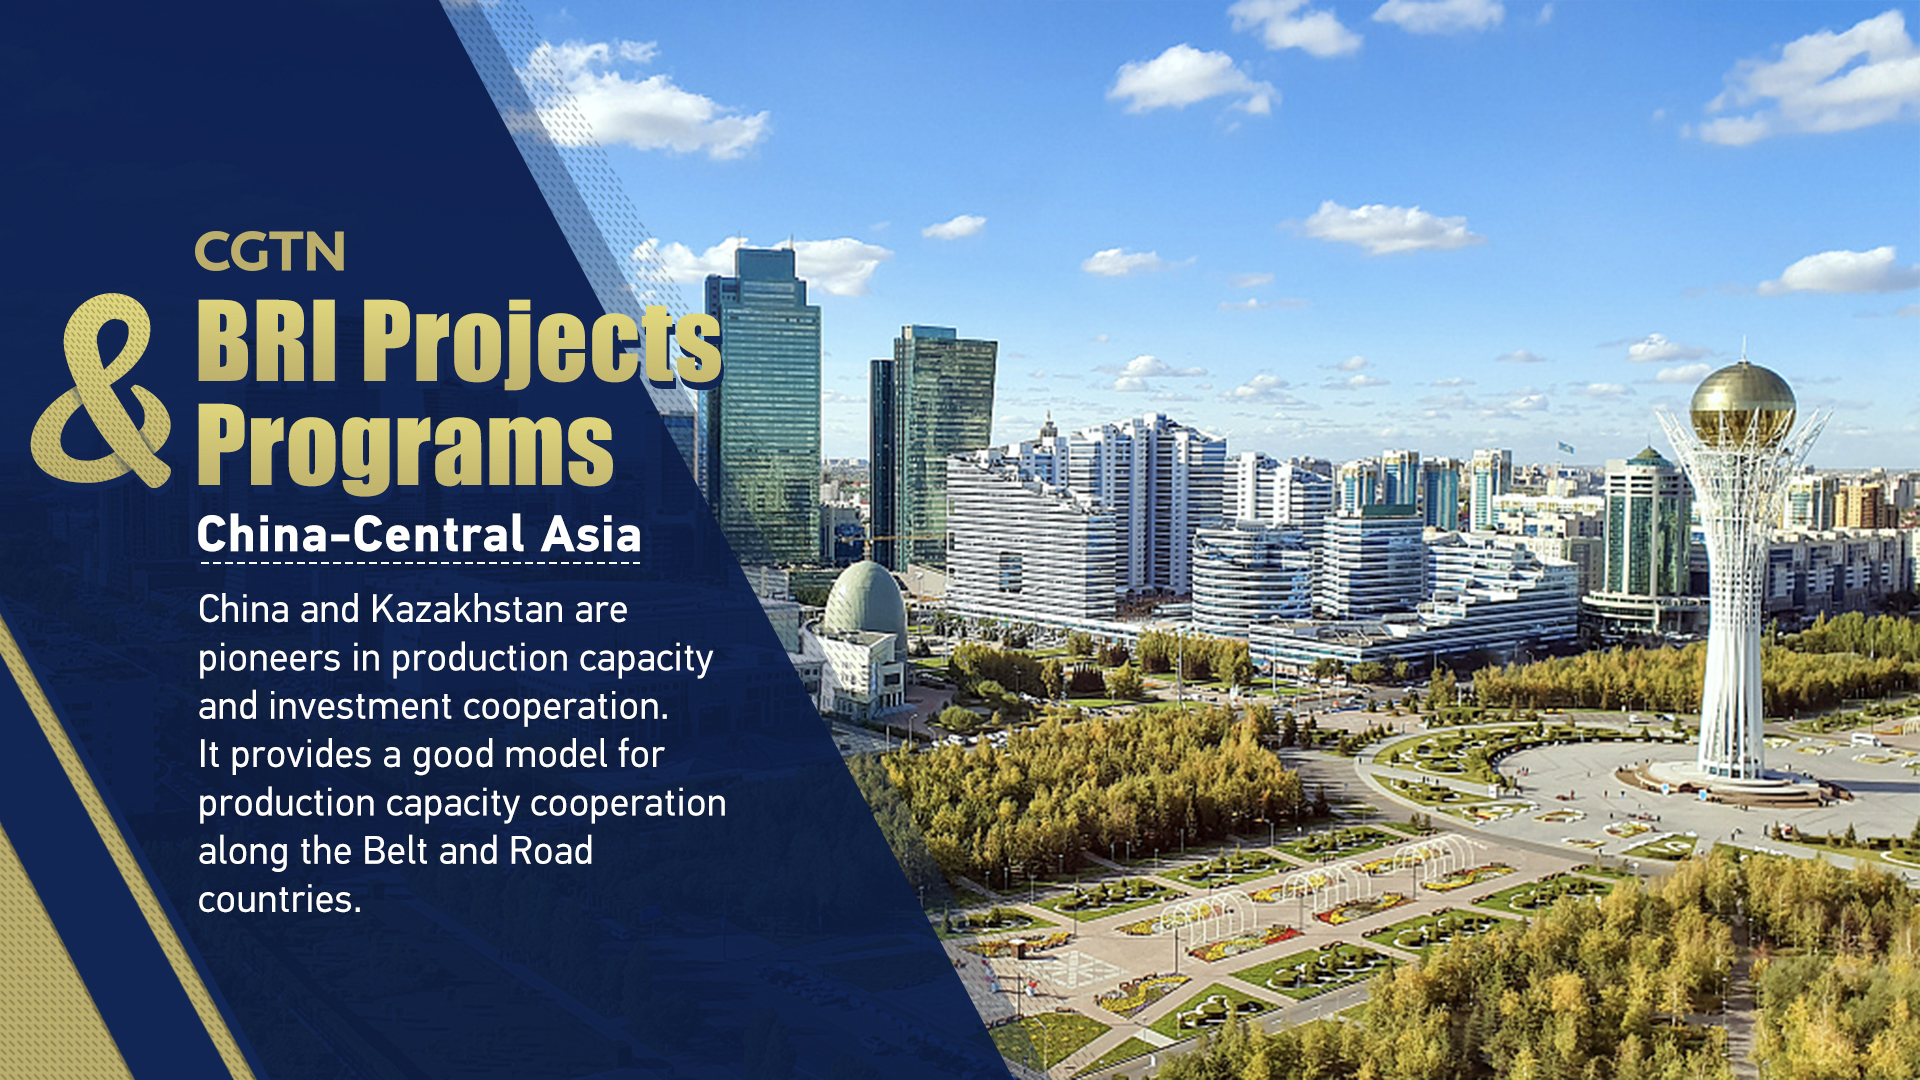 China-Central Asia: Pioneers in production capacity cooperation